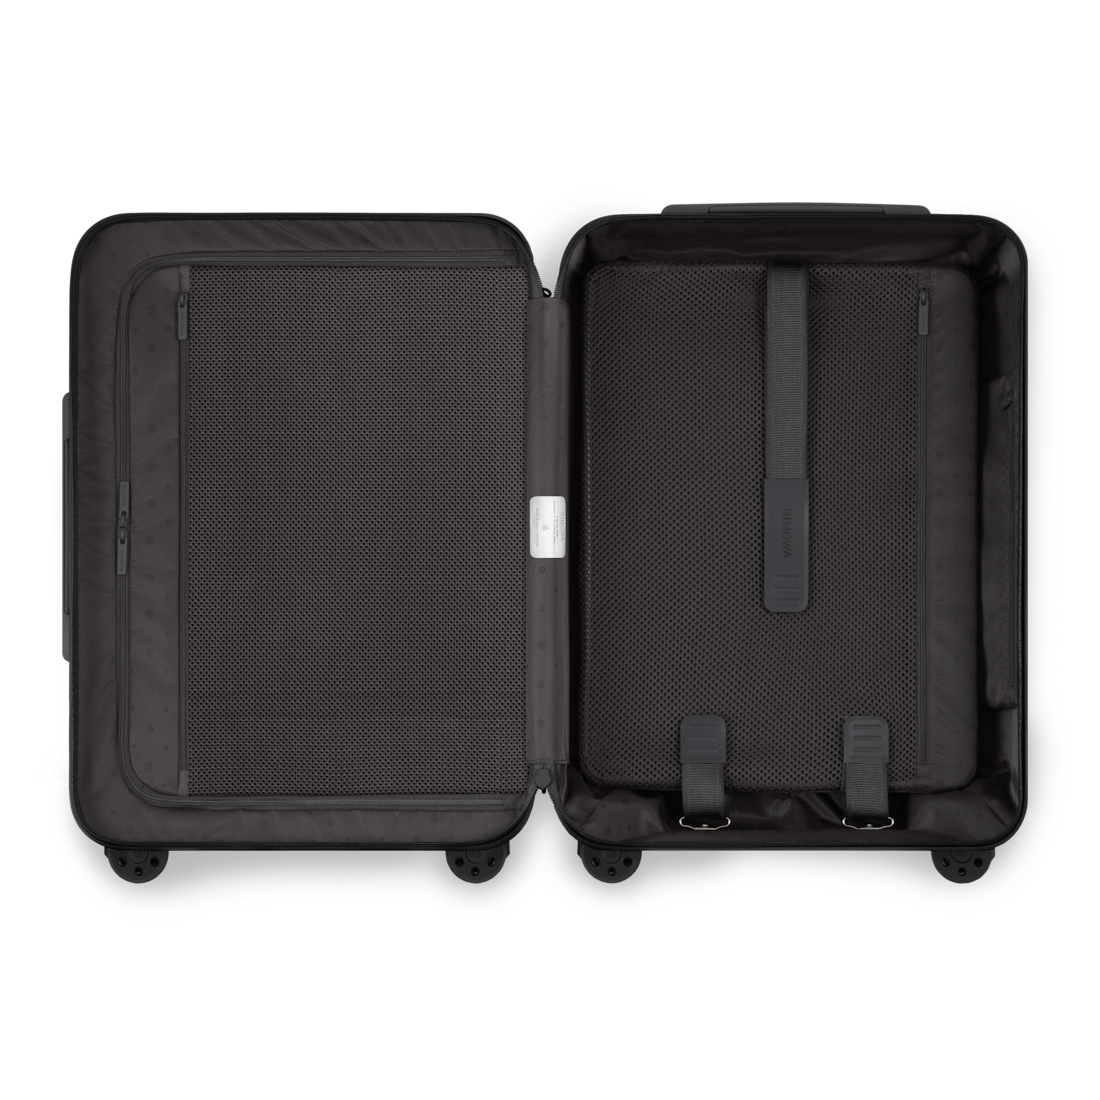 Essential Cabin Lightweight Carry-On Suitcase | gloss black | RIMOWA